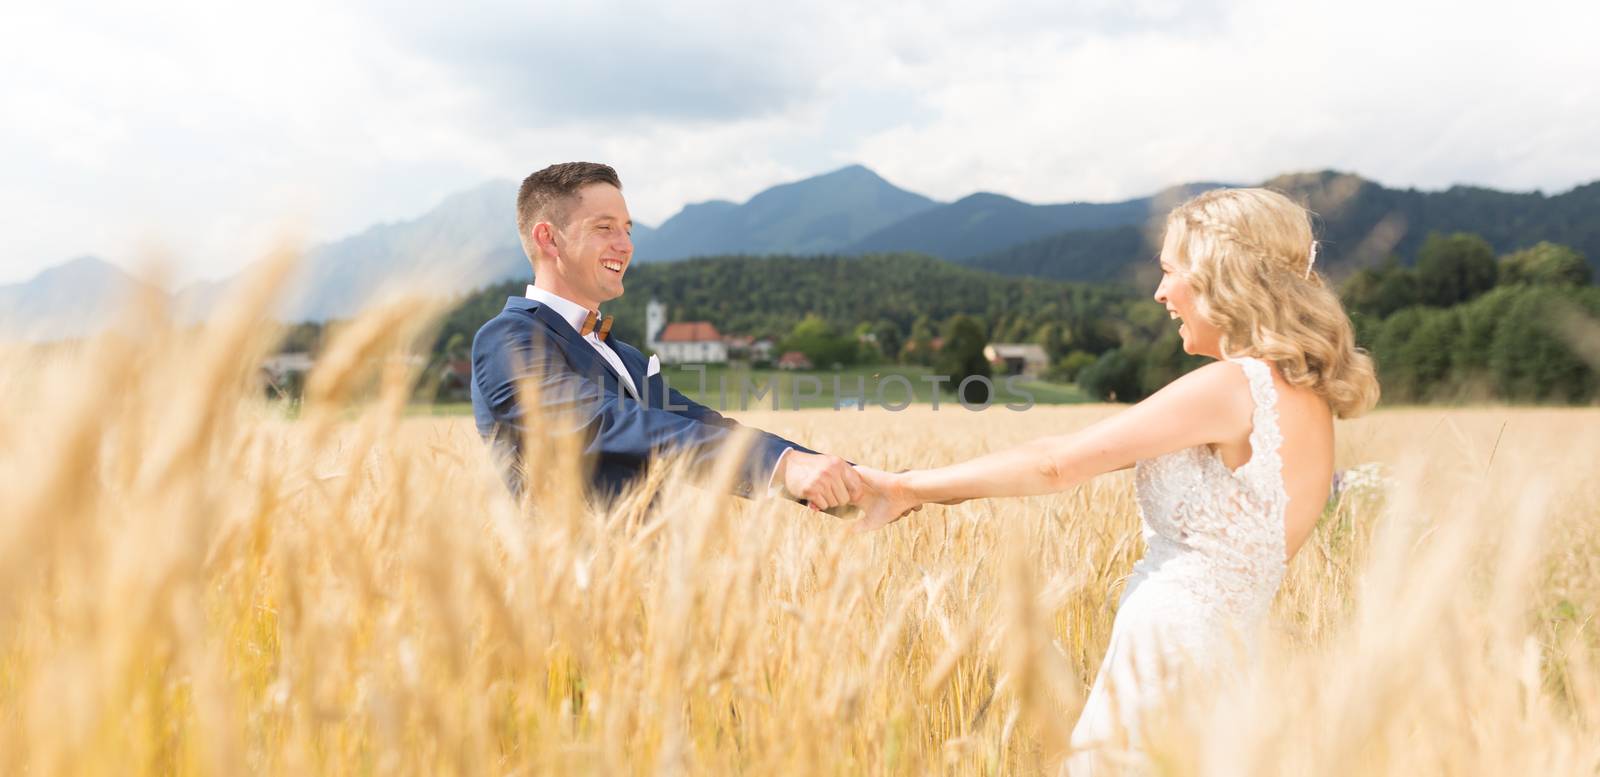 Groom and bride holding hands in wheat field somewhere in Slovenian countryside. Caucasian happy romantic young couple celebrating their marriage.